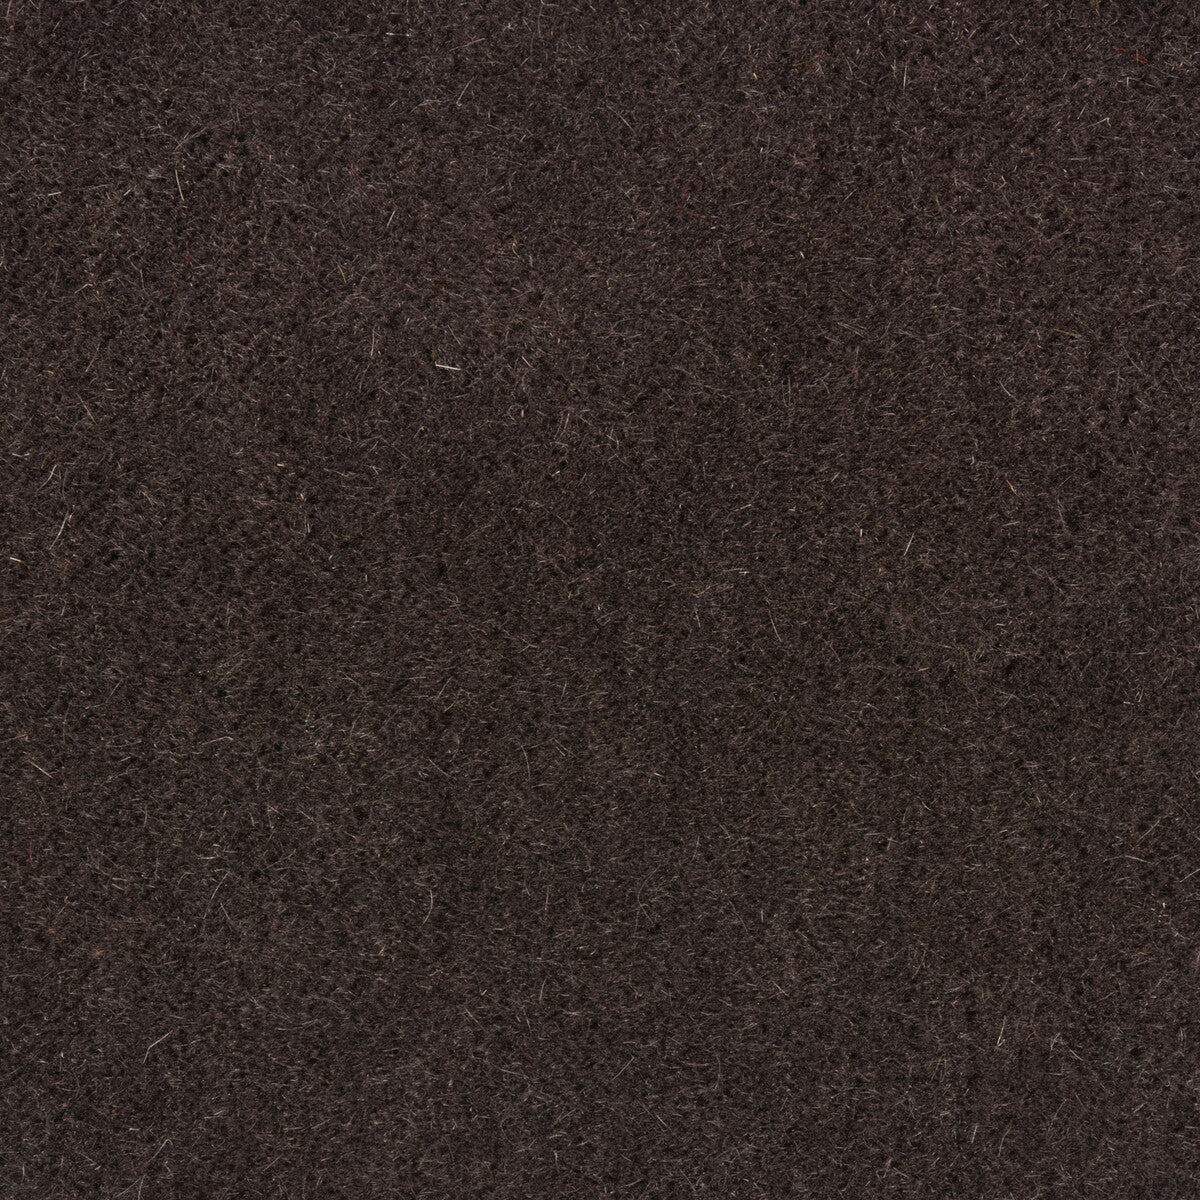 Windsor Mohair fabric in espresso color - pattern 34258.68.0 - by Kravet Couture